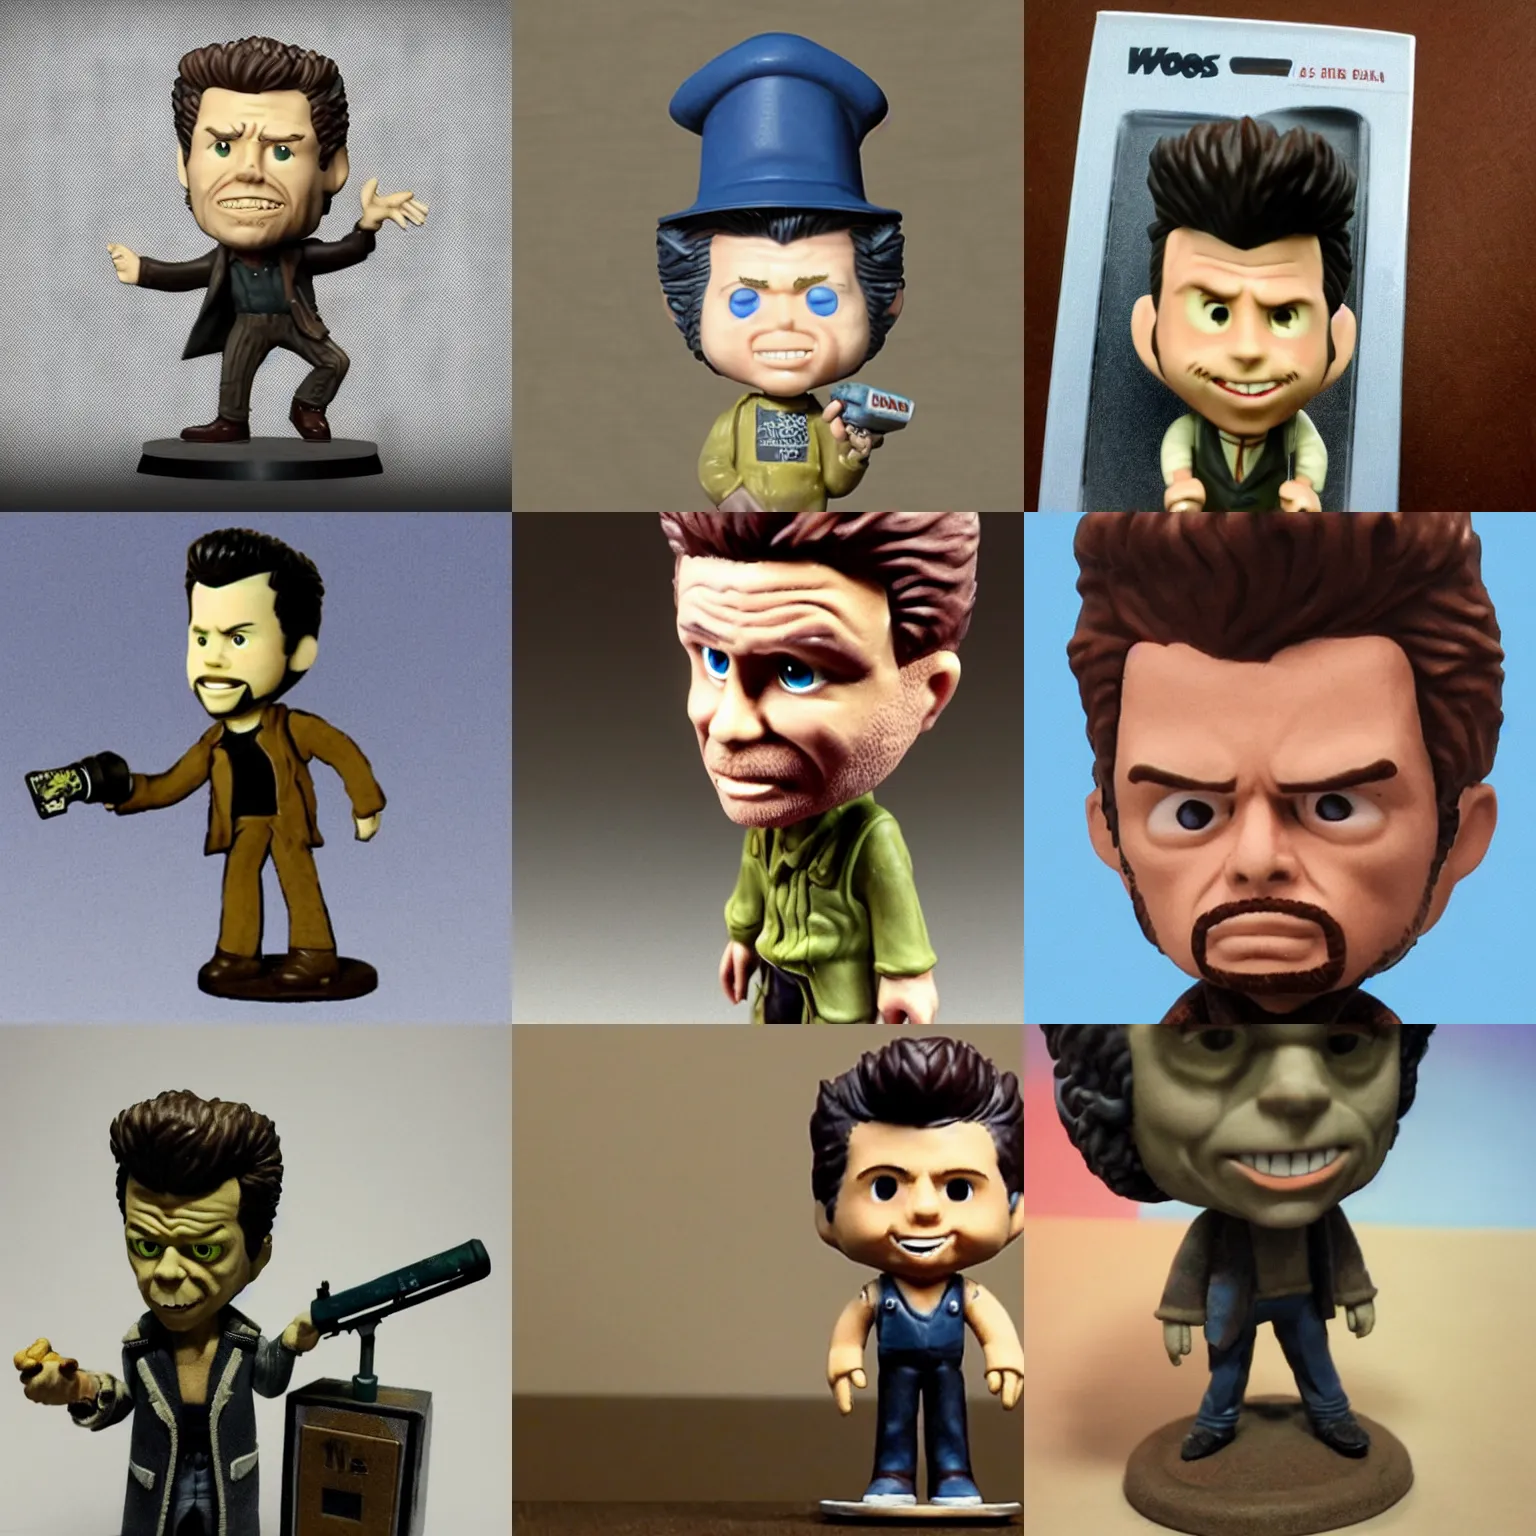 Prompt: Tom Waits as a fallout bobble head